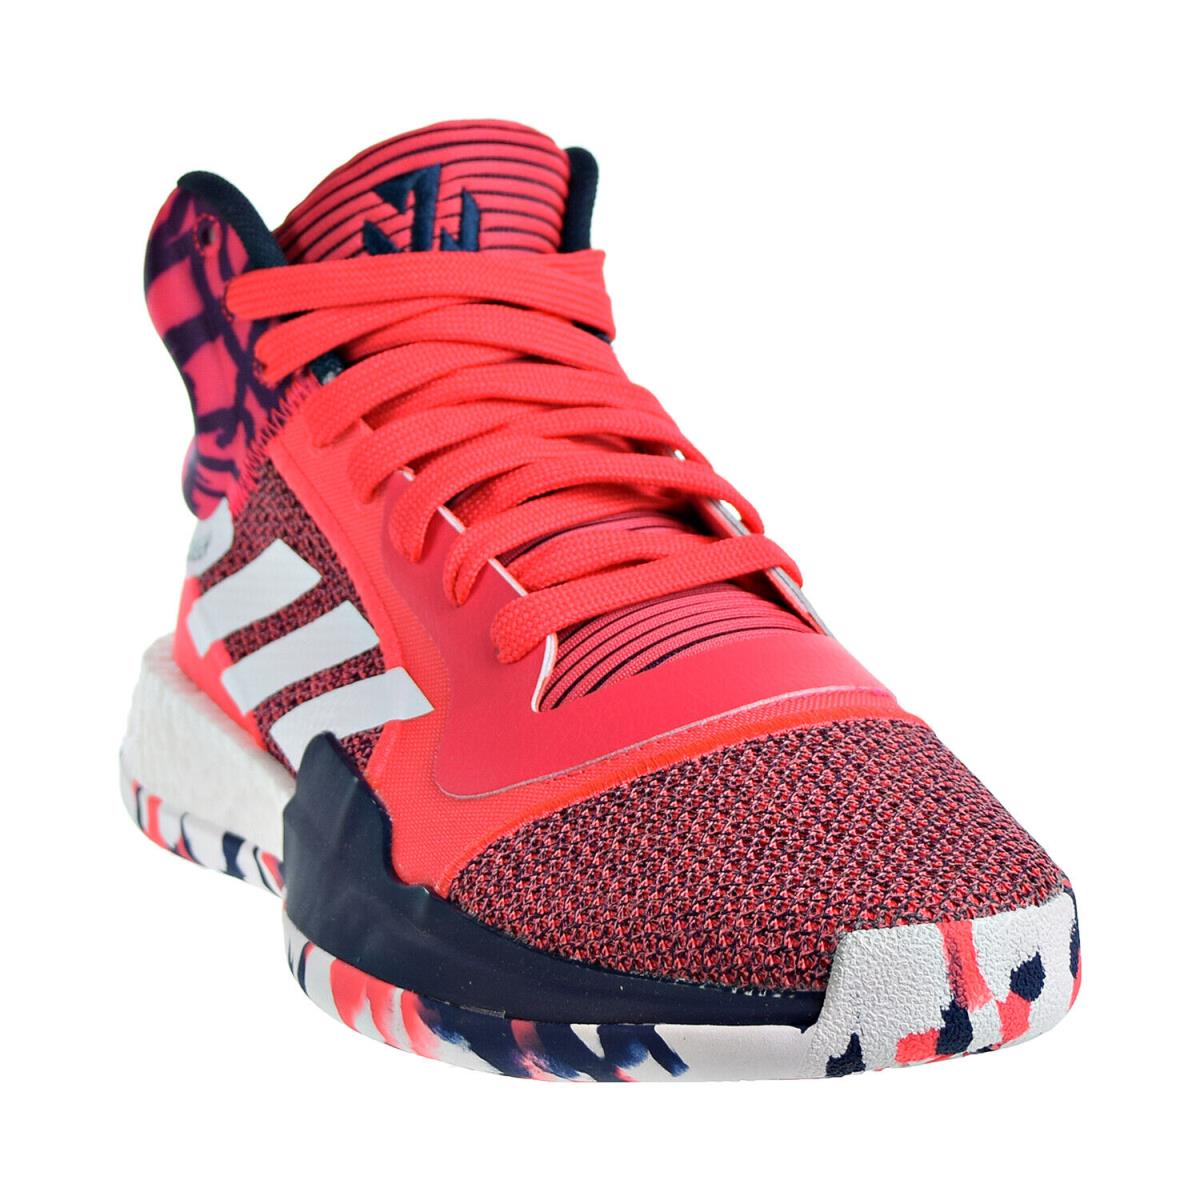 Adidas Marquee Boost Men`s Basketball Shoes Shock Red-white-navy G27737 - Red/White/Navy